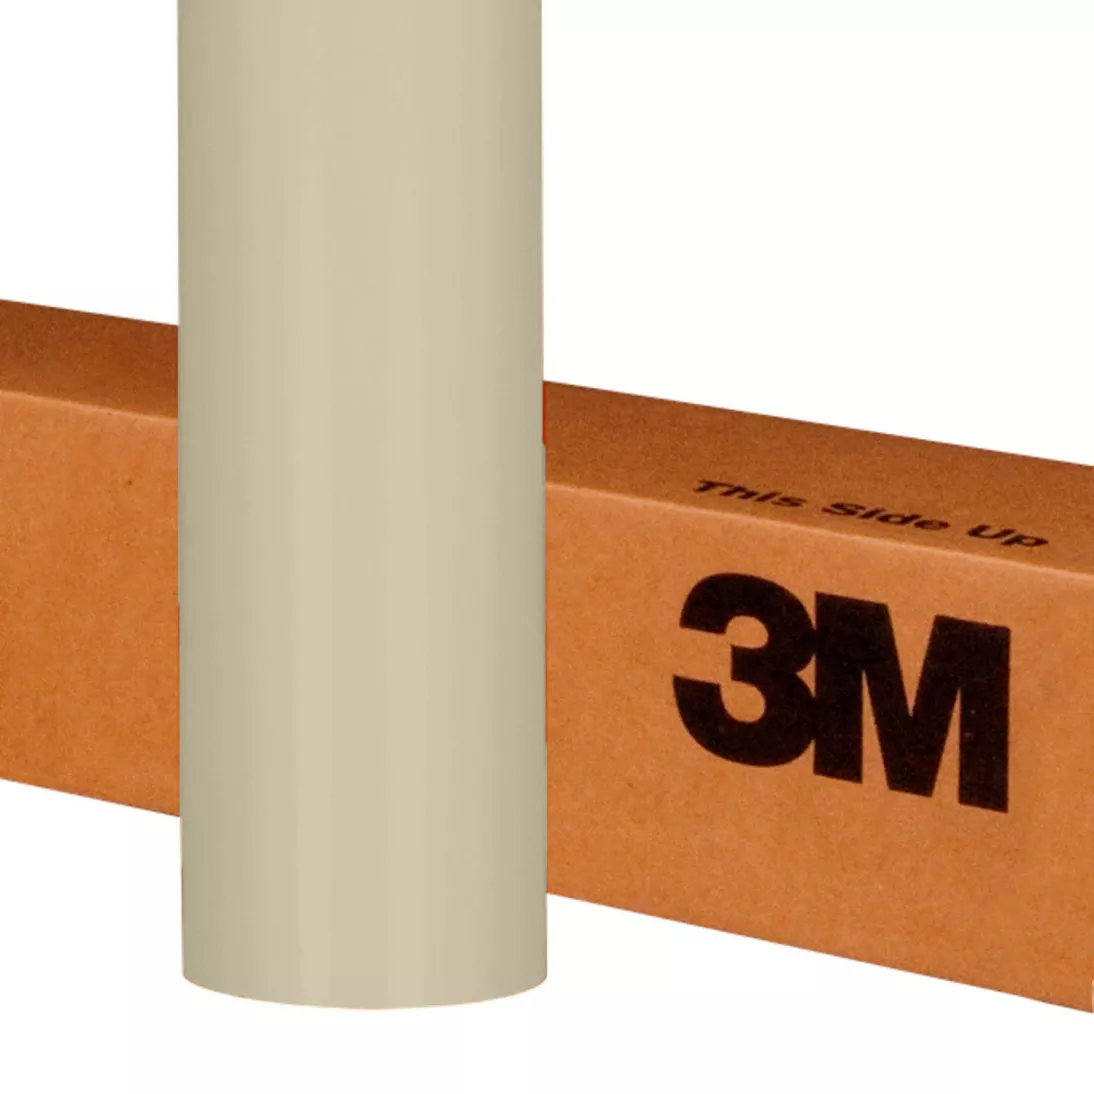 3M™ Scotchcal™ ElectroCut™ Graphic Film 7725-81, Stone Gray, 48 in x 50
yd